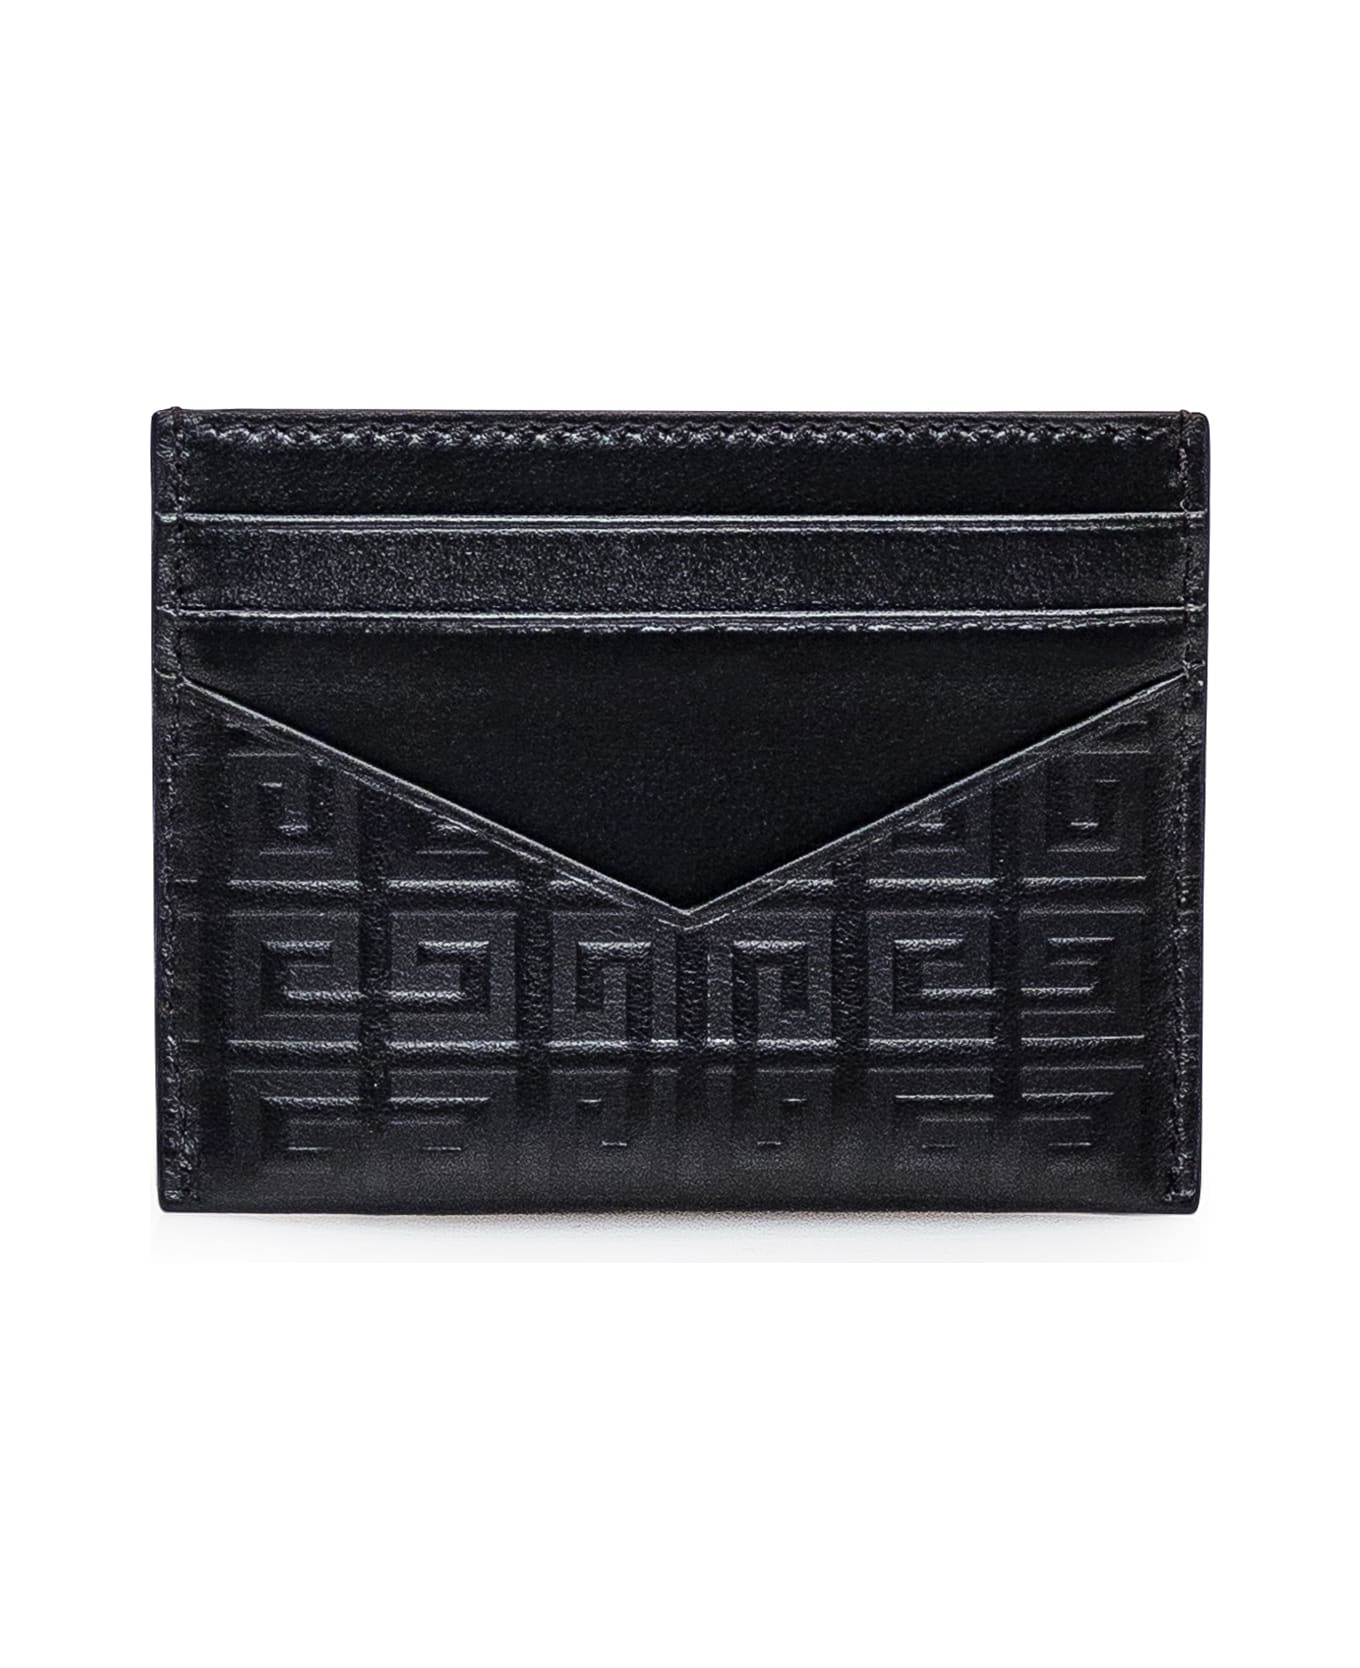 Givenchy Leather 4g Cardcase - Black 財布